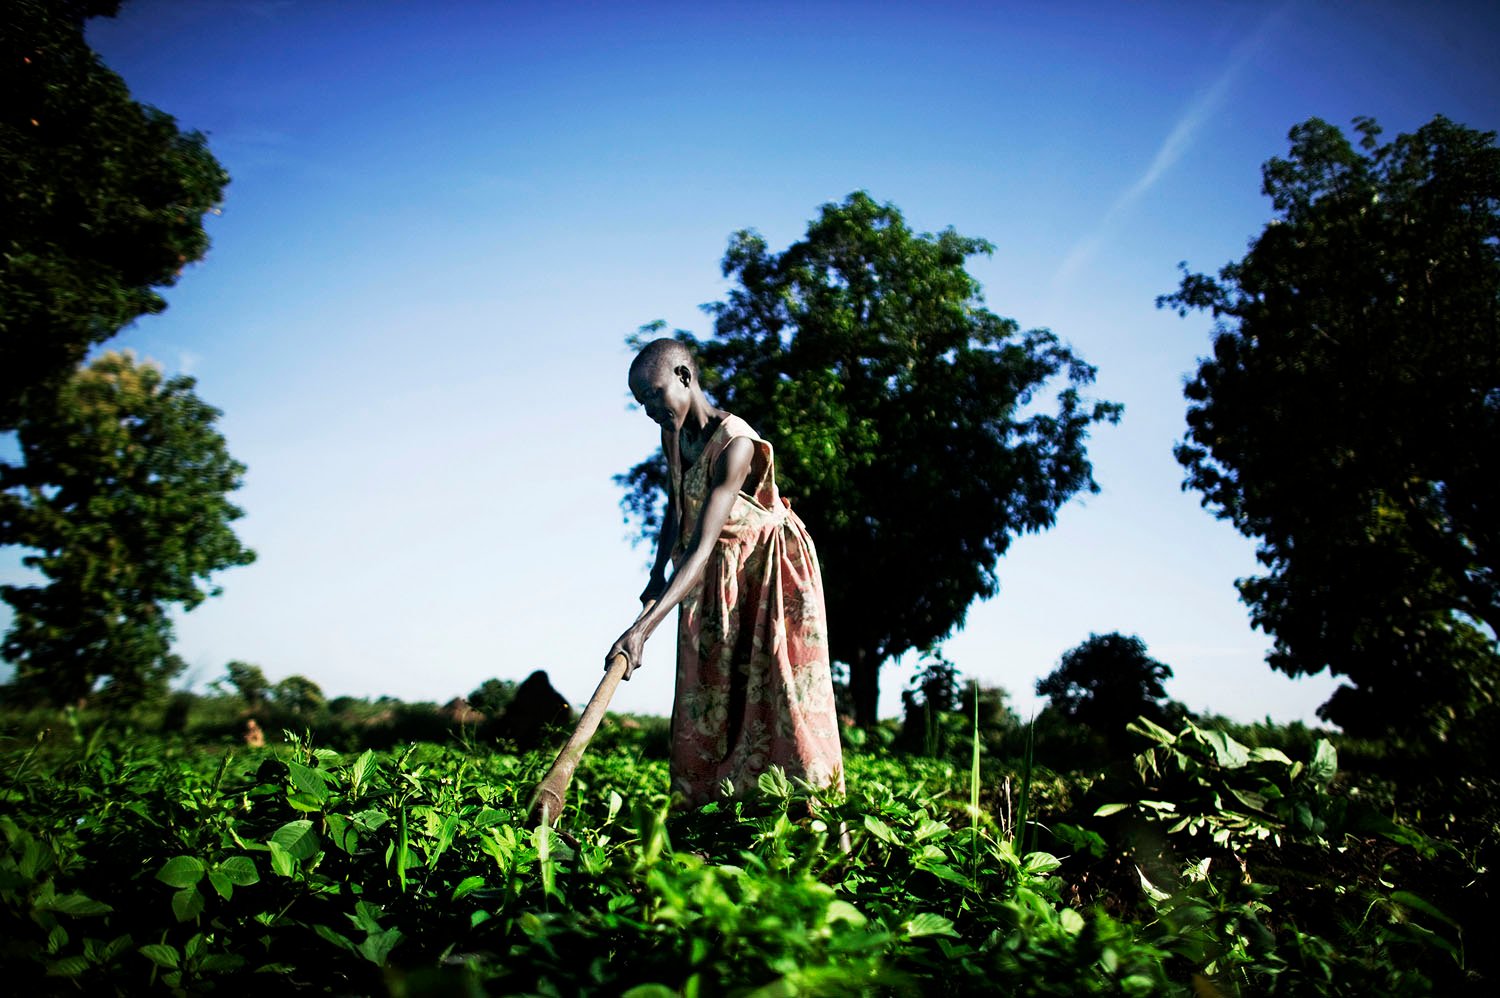  A woman tends to her garden in the fertile lands along the southern border with Uganda. The tribes in the deep south are agriculturalists and differ significantly in collective personality from the semi-nomadic pastoralists of central southern Sudan